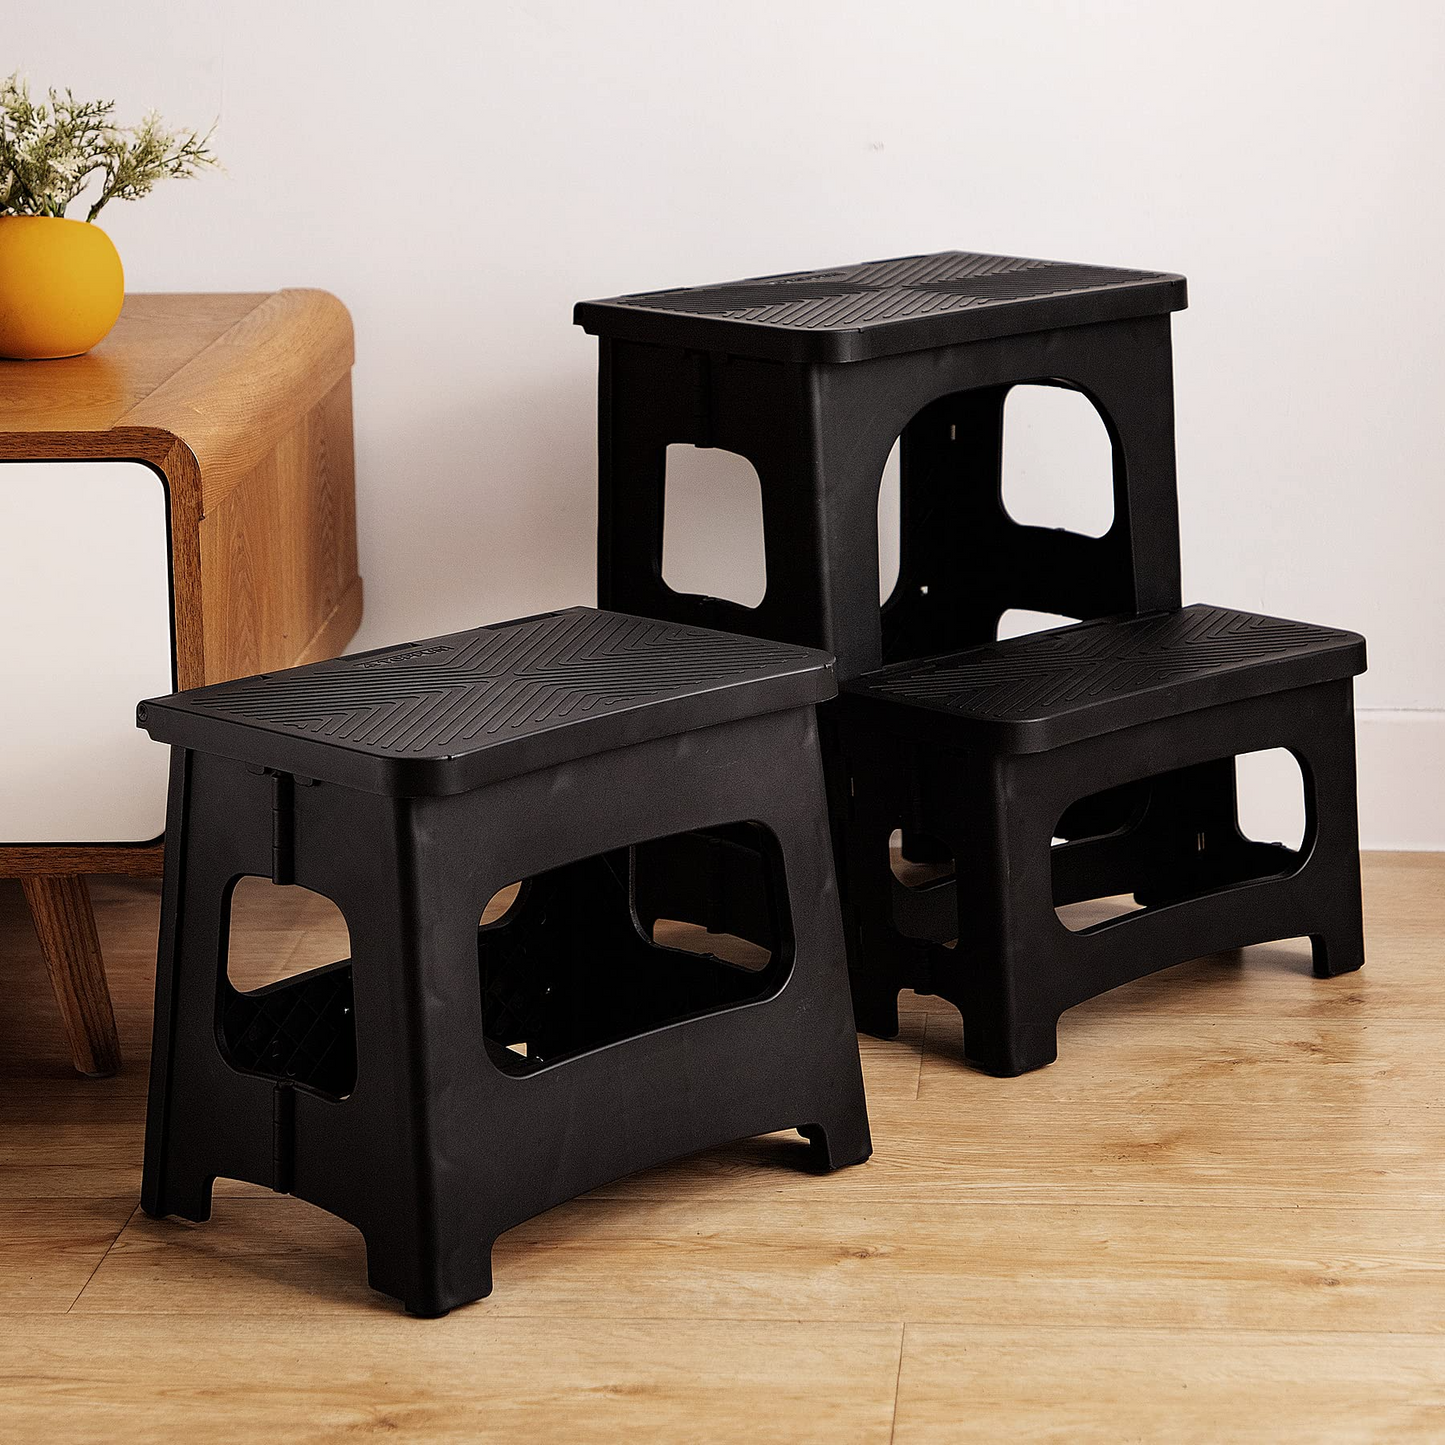 Topfun 8“ 17” Folding 2-Step Stool, Non-Slip Footstool for Adults or Kids,